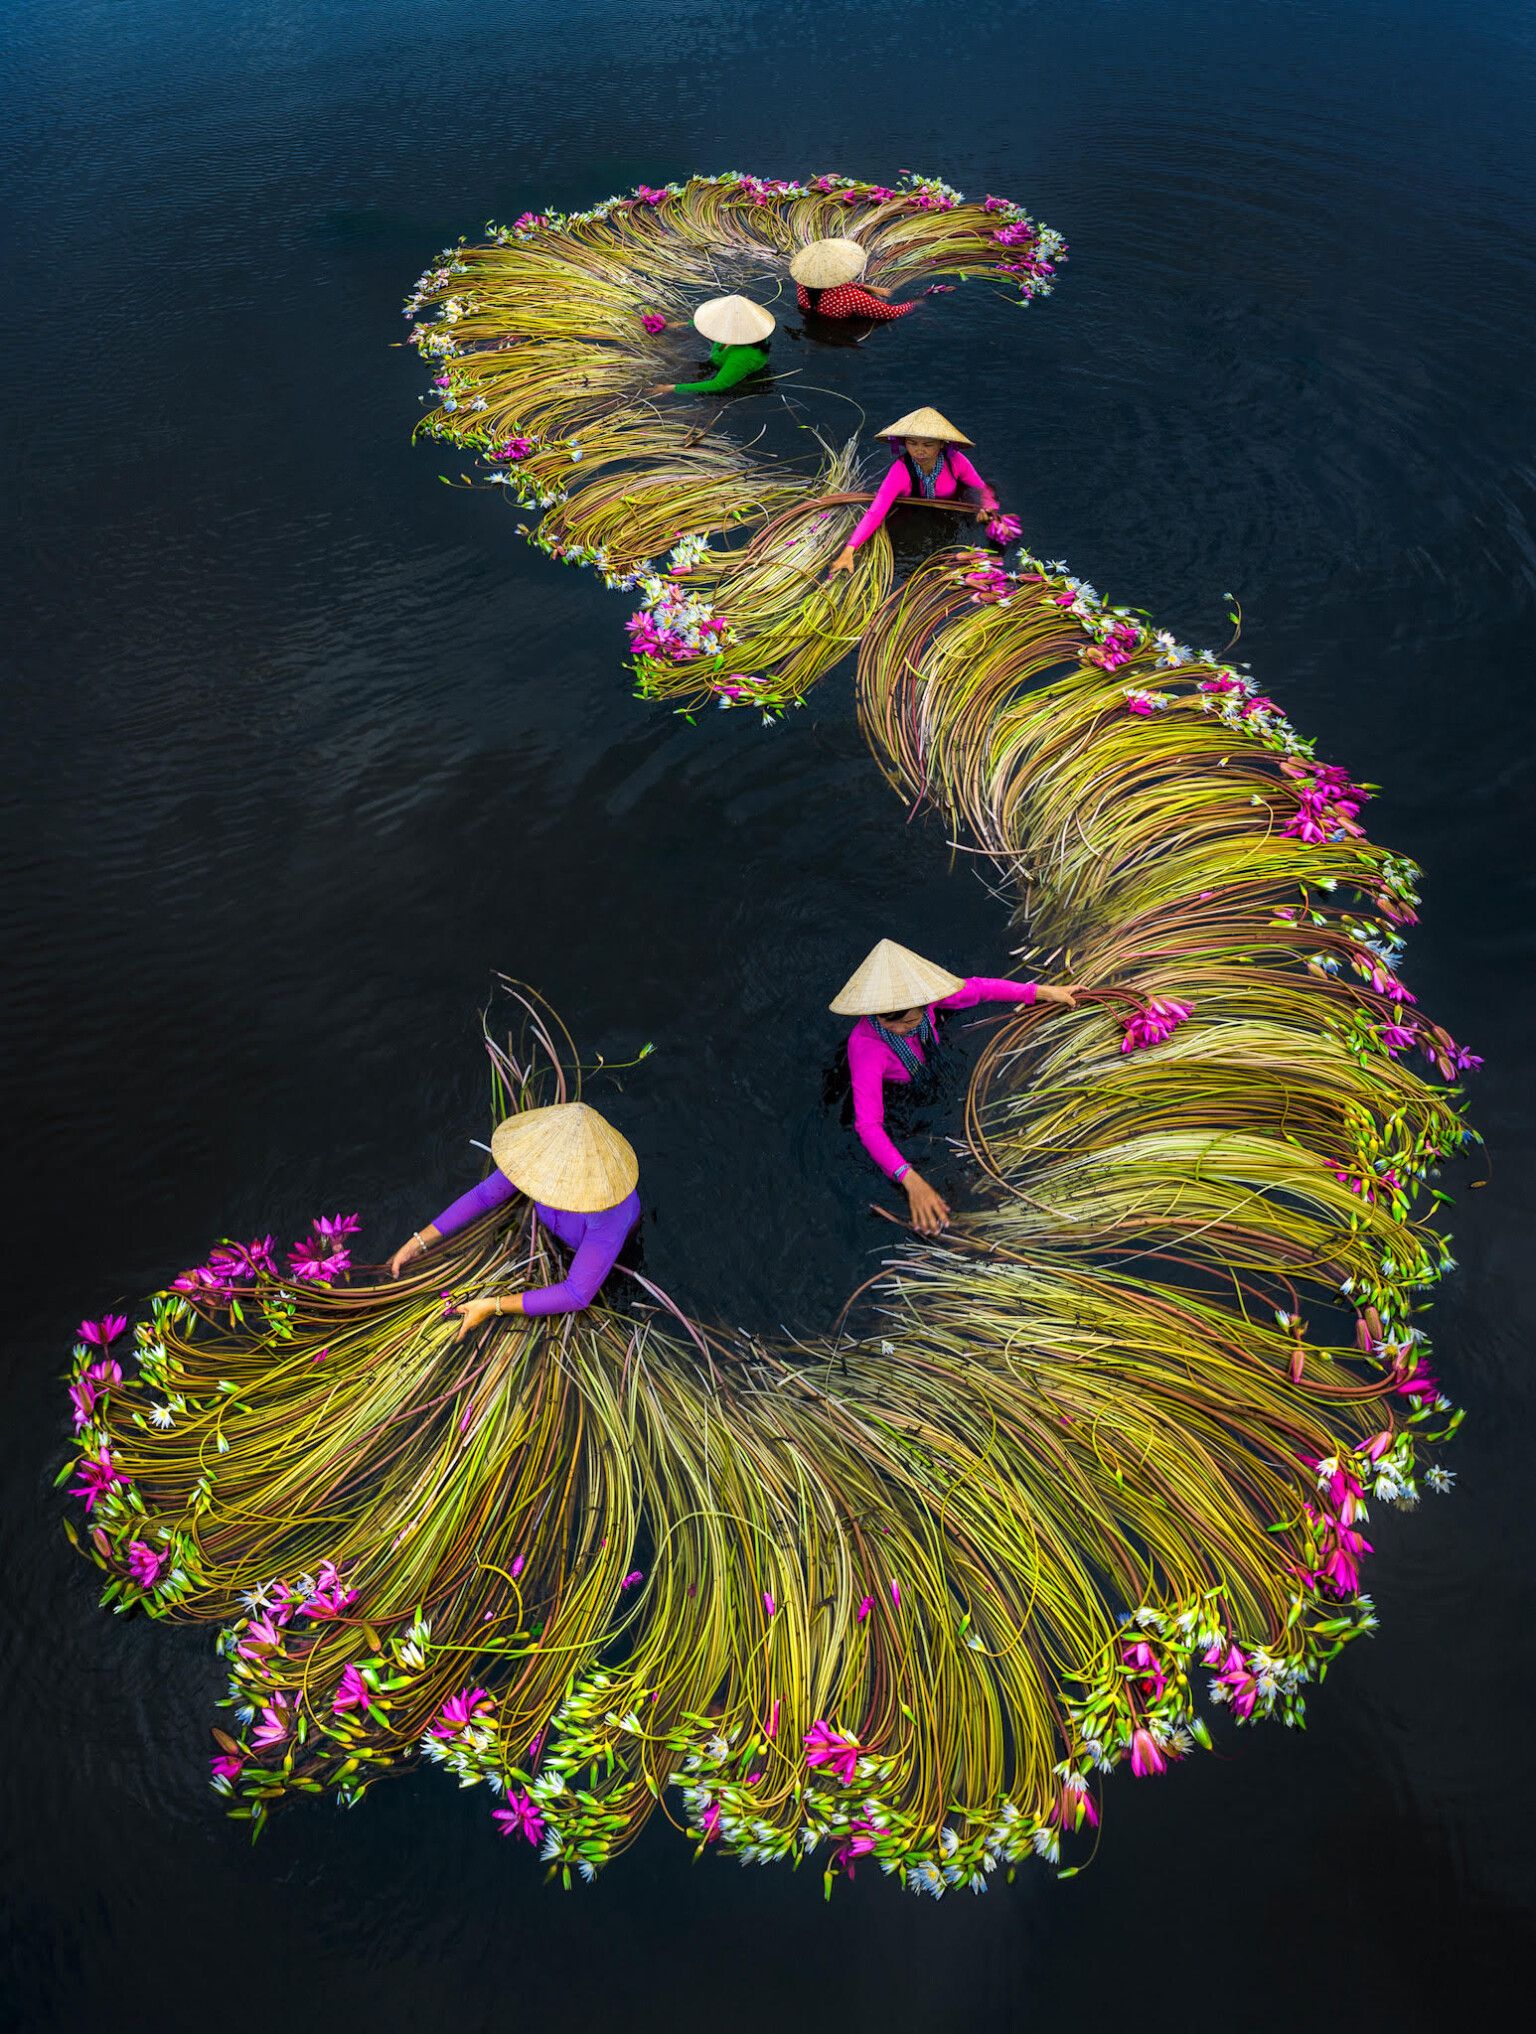 Vivid Photographs by Trung Huy Pham Capture Annual Water Lily Harvest in Vietnam